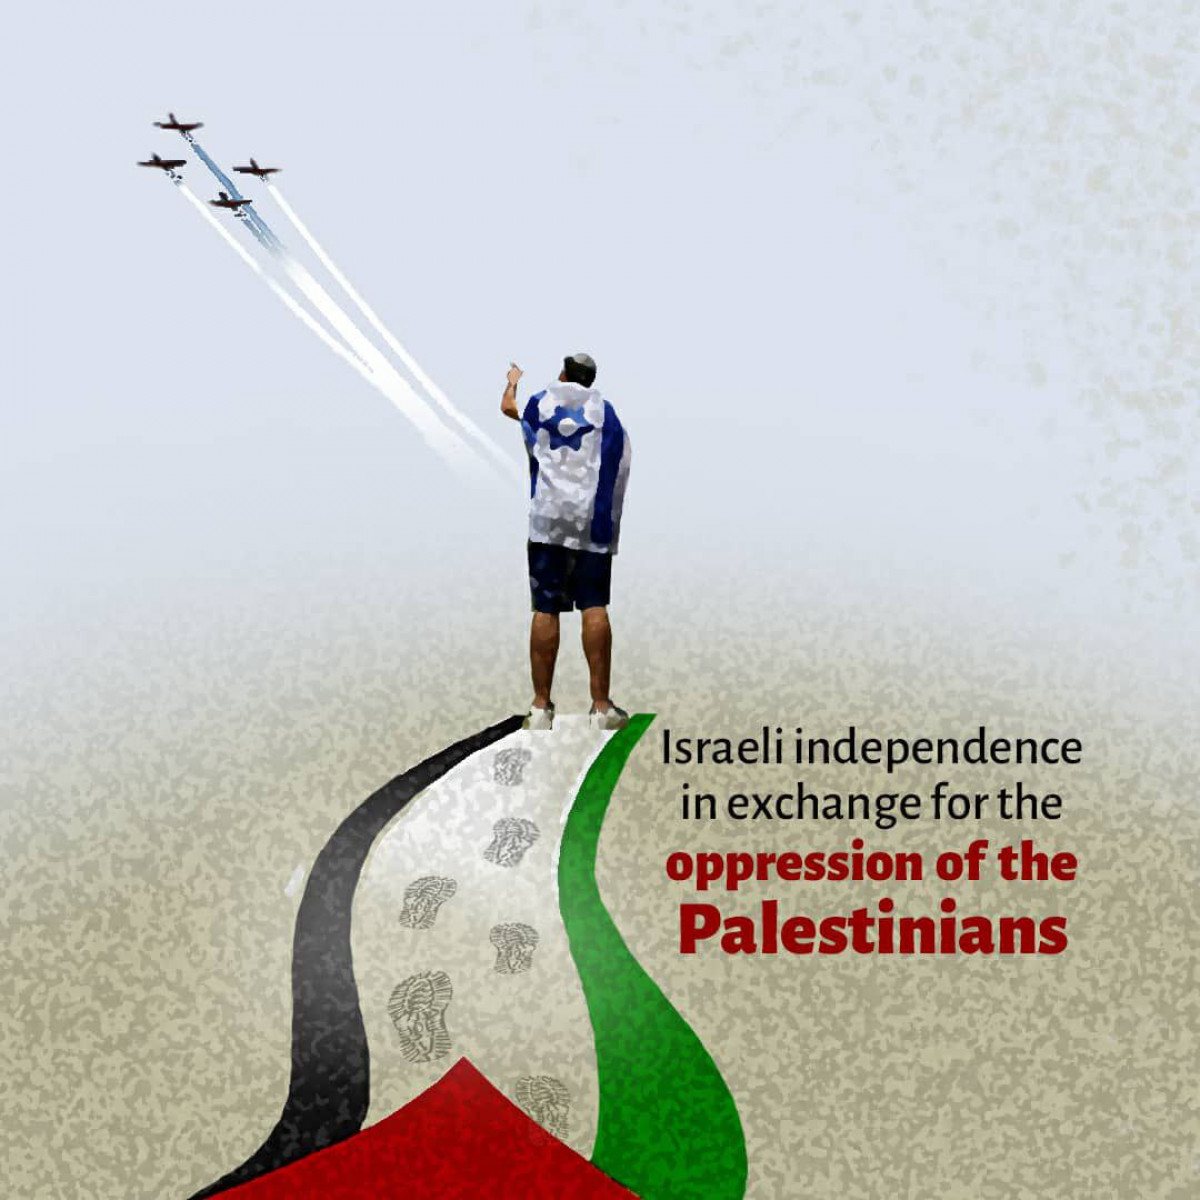 Israeli independence in exchange for the oppression of the Palestinians